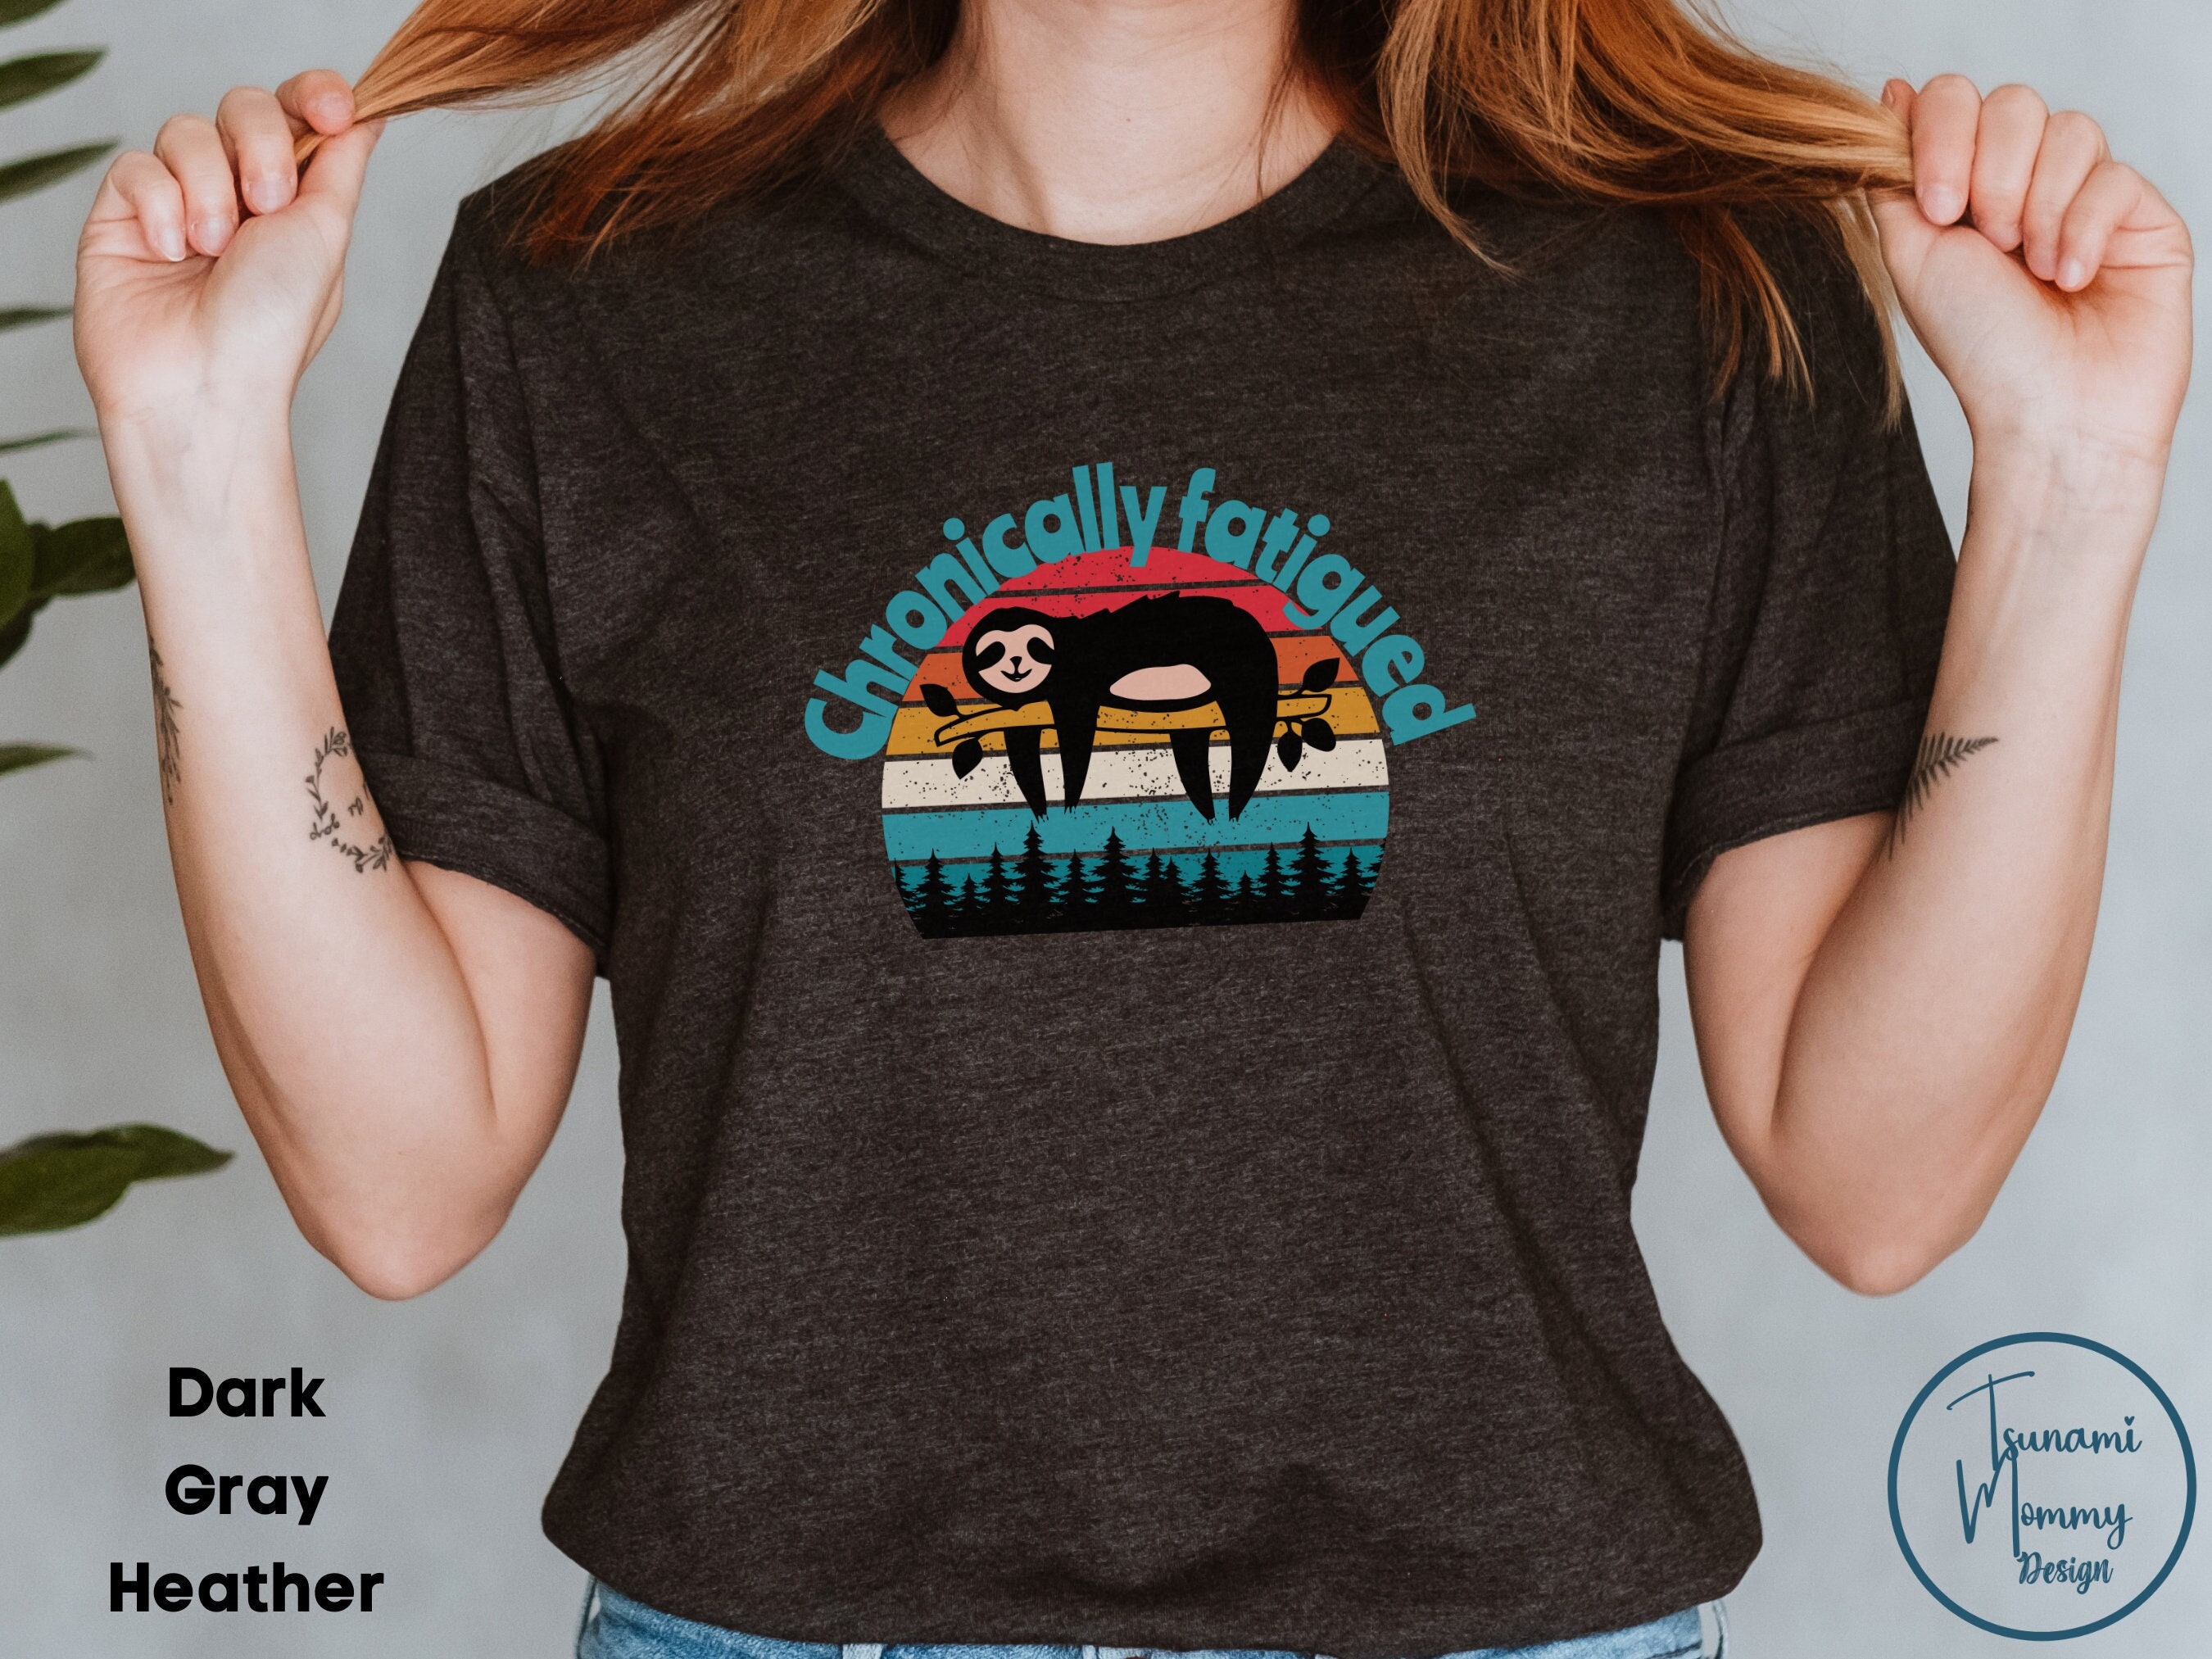 Chronic illness, spoonie, sloth gifts. Show your support for chronic fatigue/invisible illness with this sloth apparel-plus sizes available